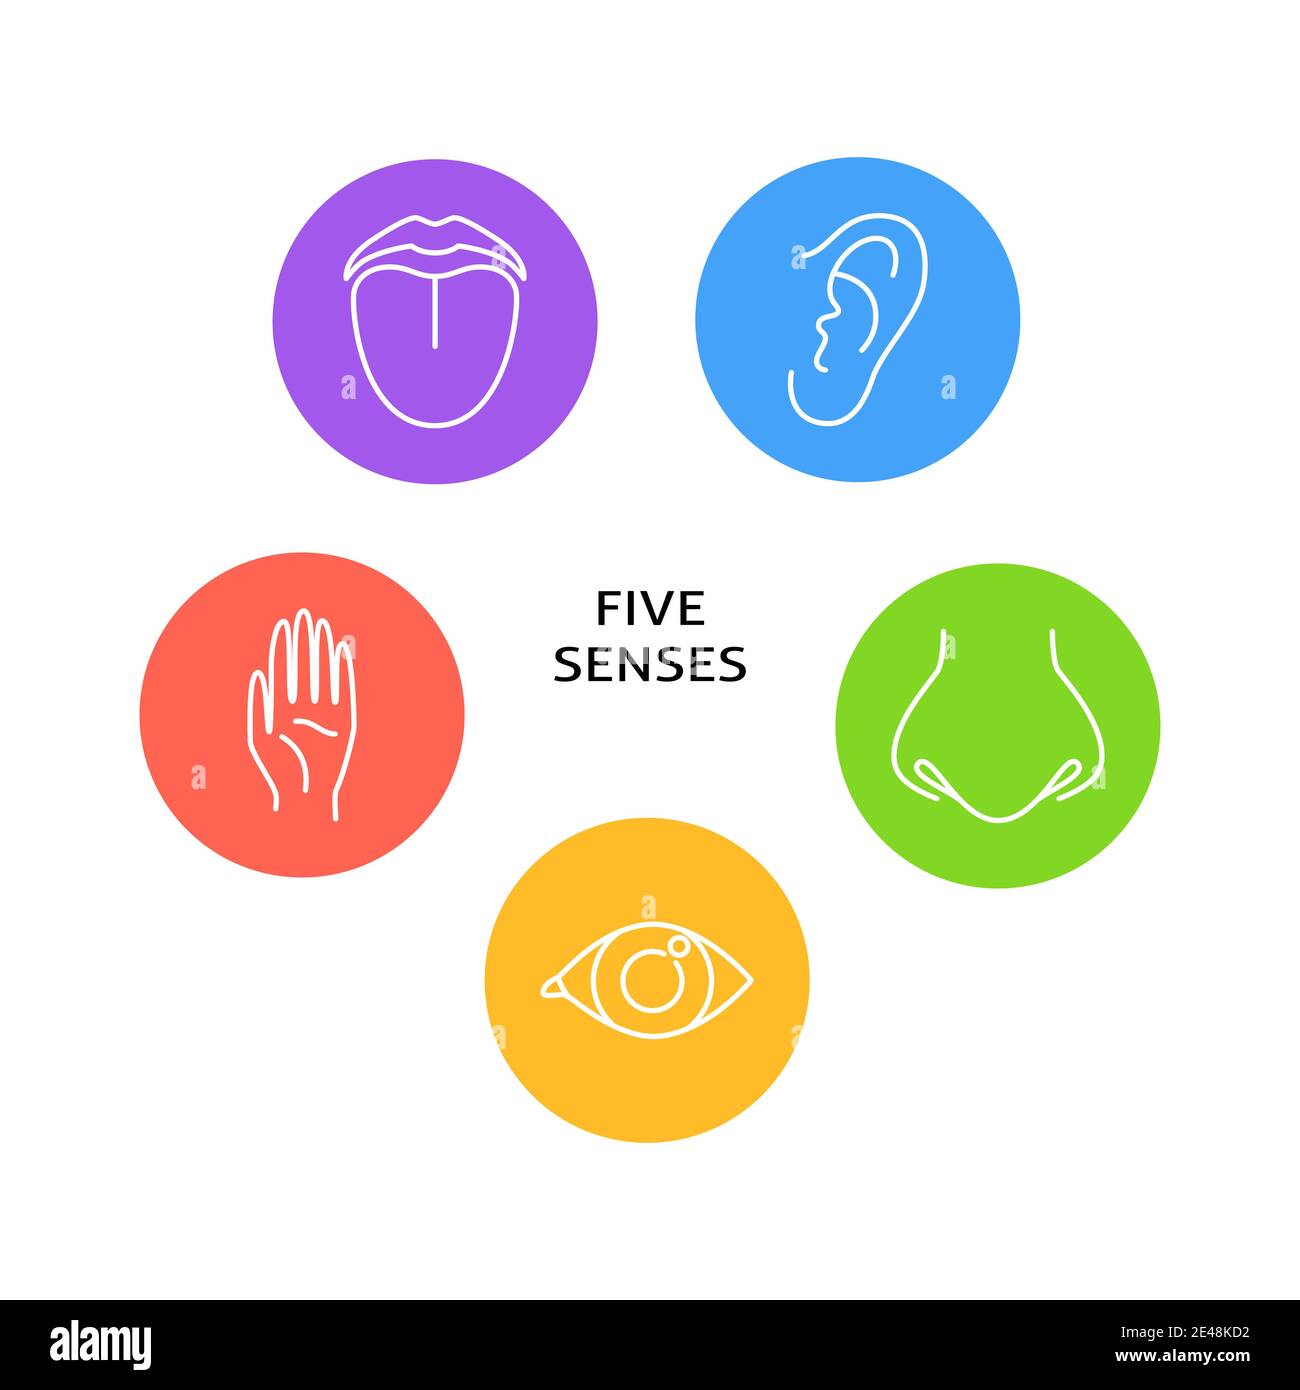 Five senses poster with symbols in line style. Banner with human perception elements - vision, touch, hearing, taste, smell. Vector illustration. Stock Vector